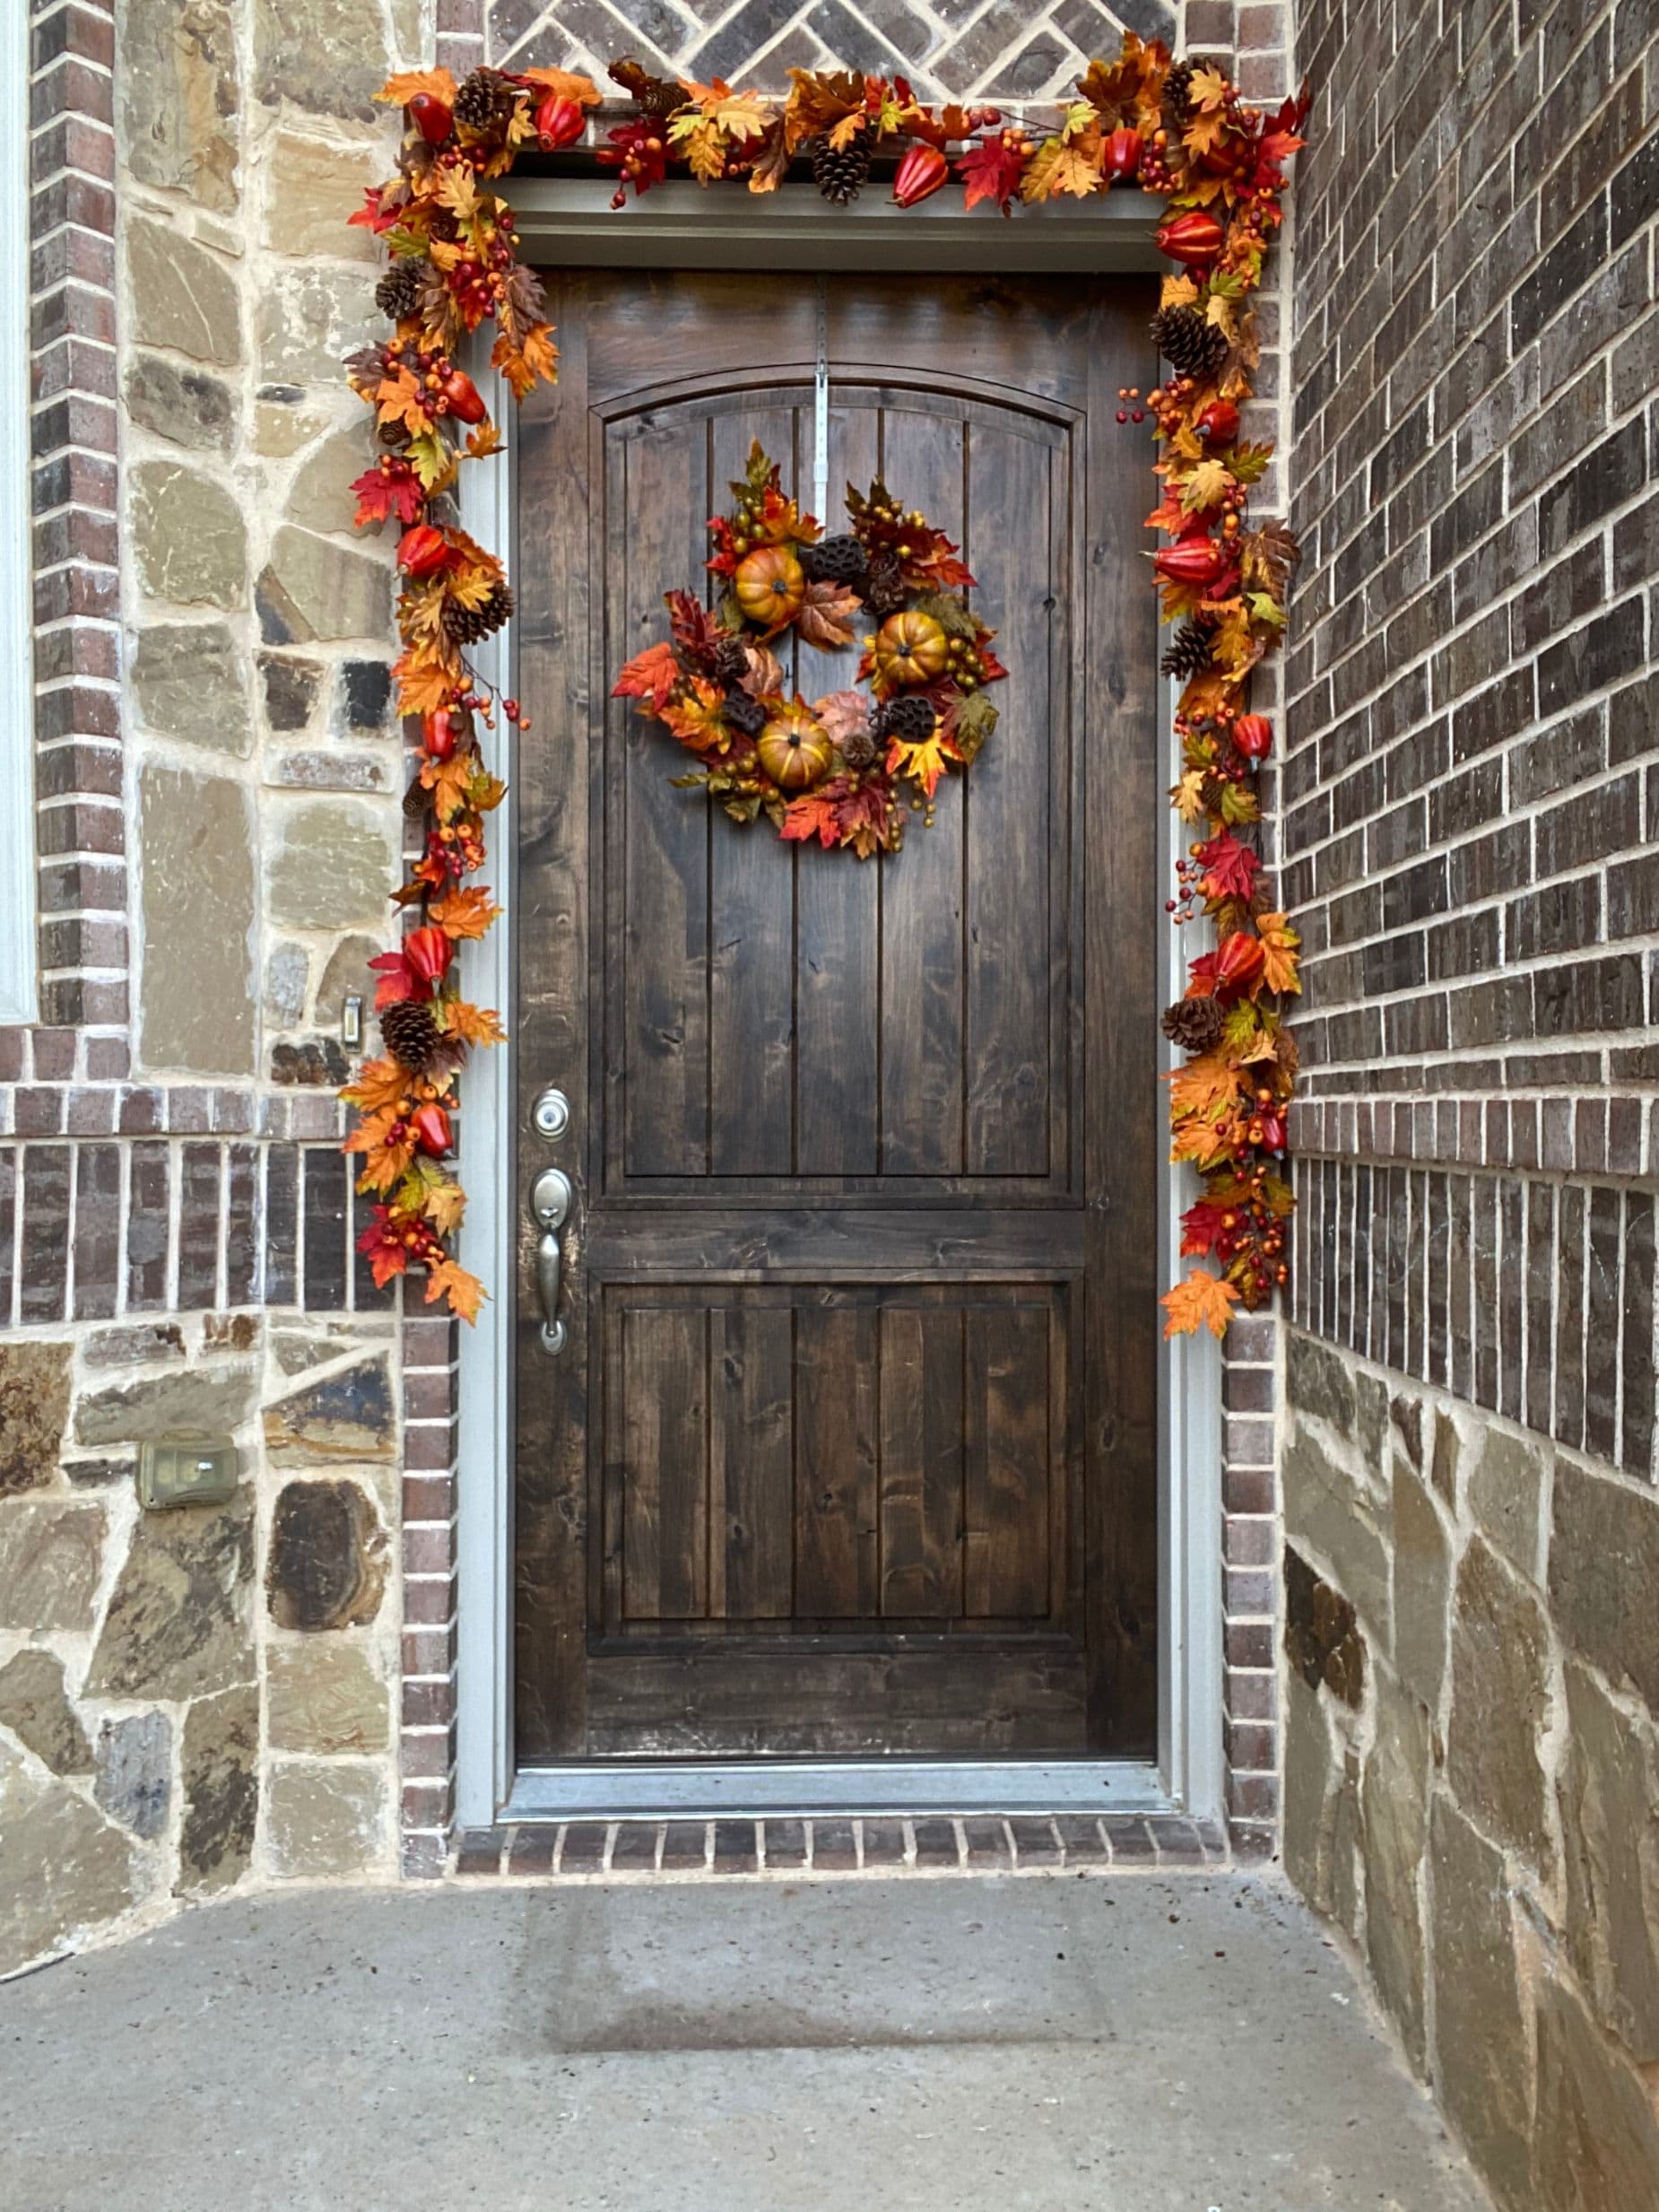 Add a fall wreath to your front door